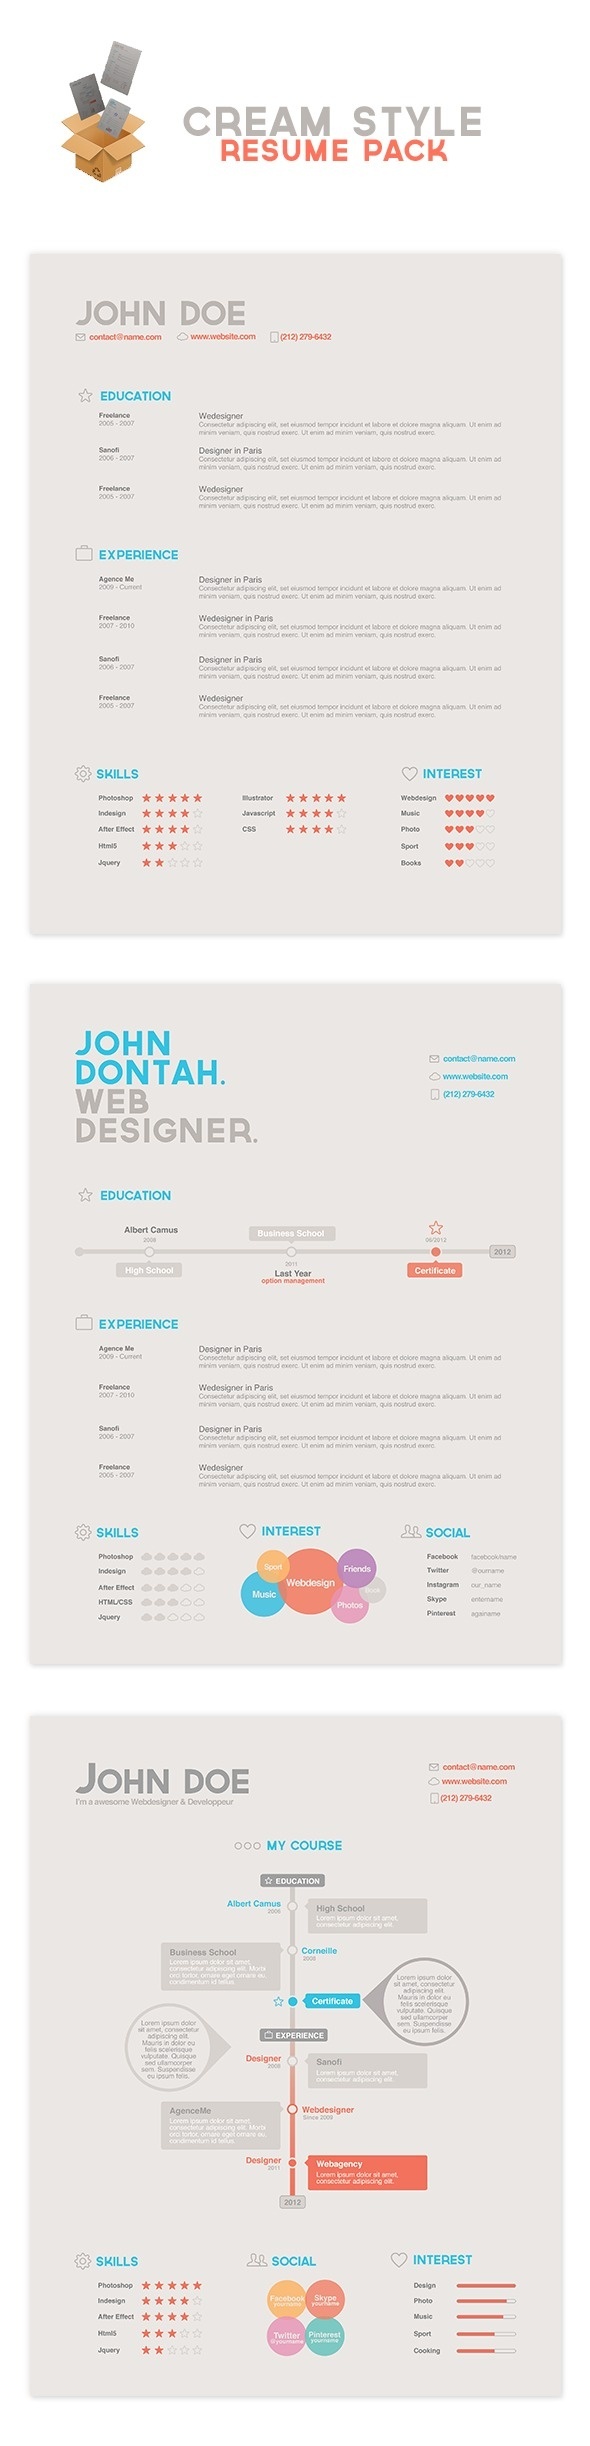 Preview #resumes